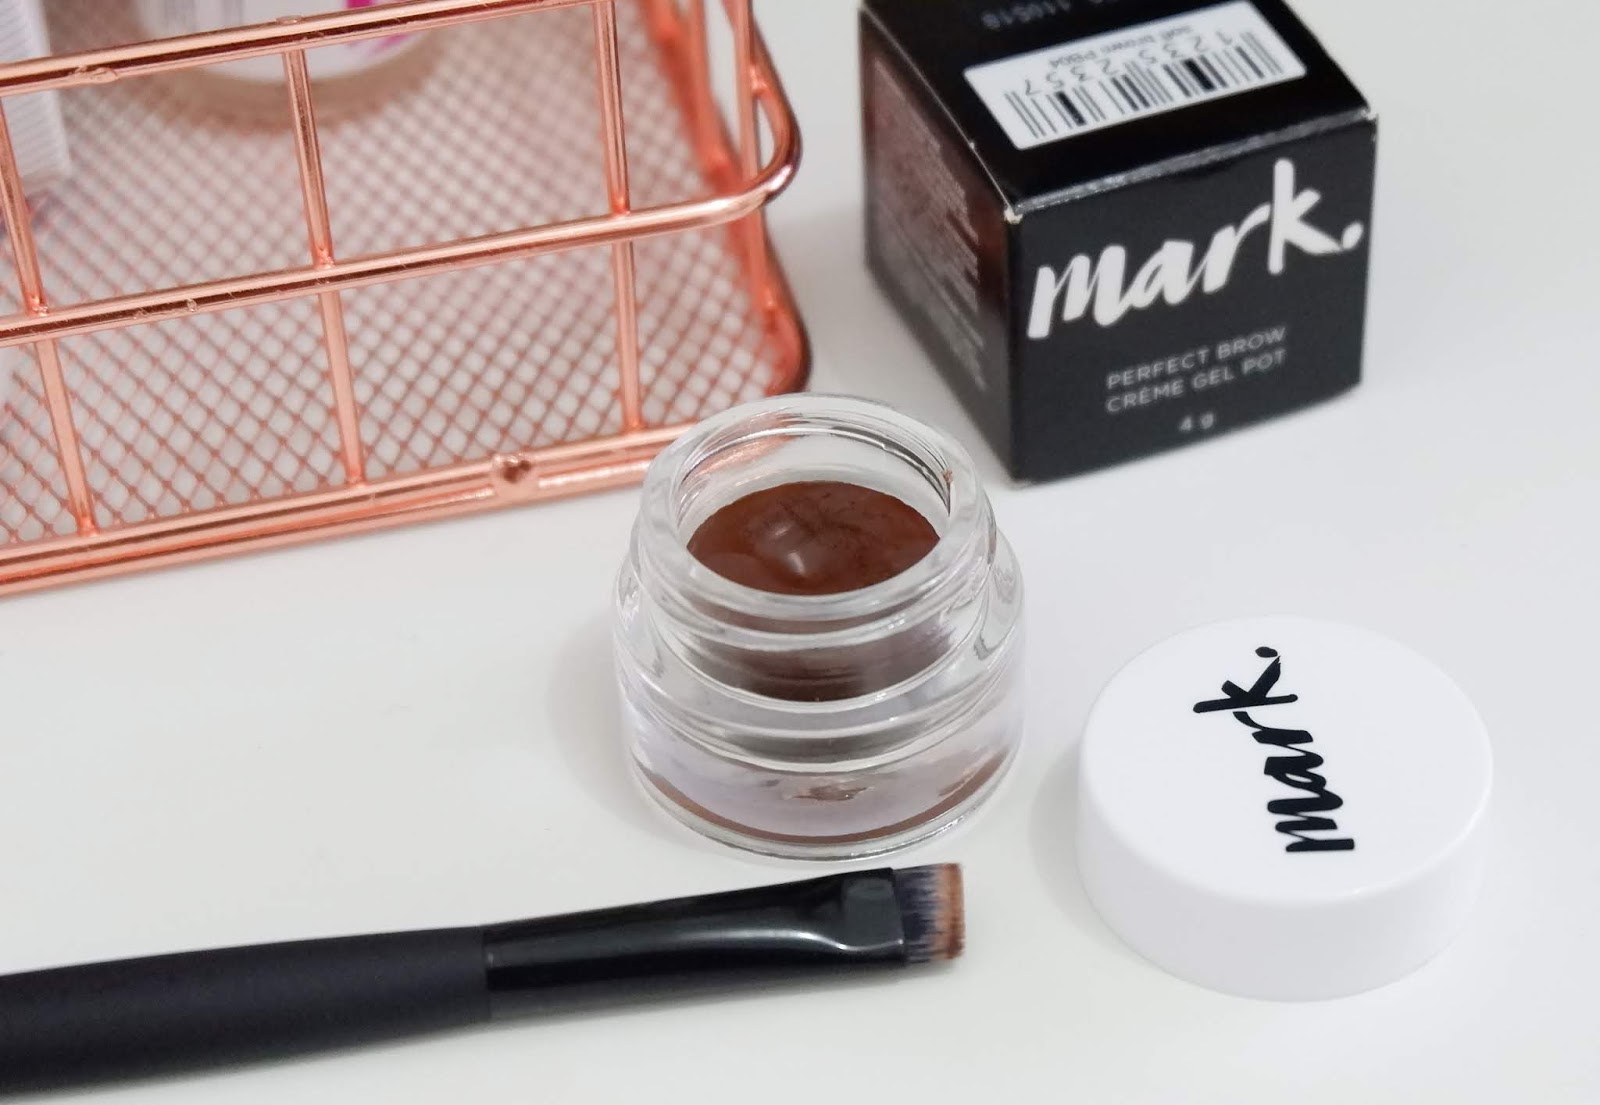 MARK. BY AVON PERFECT CREAM GEL POT REVIEW